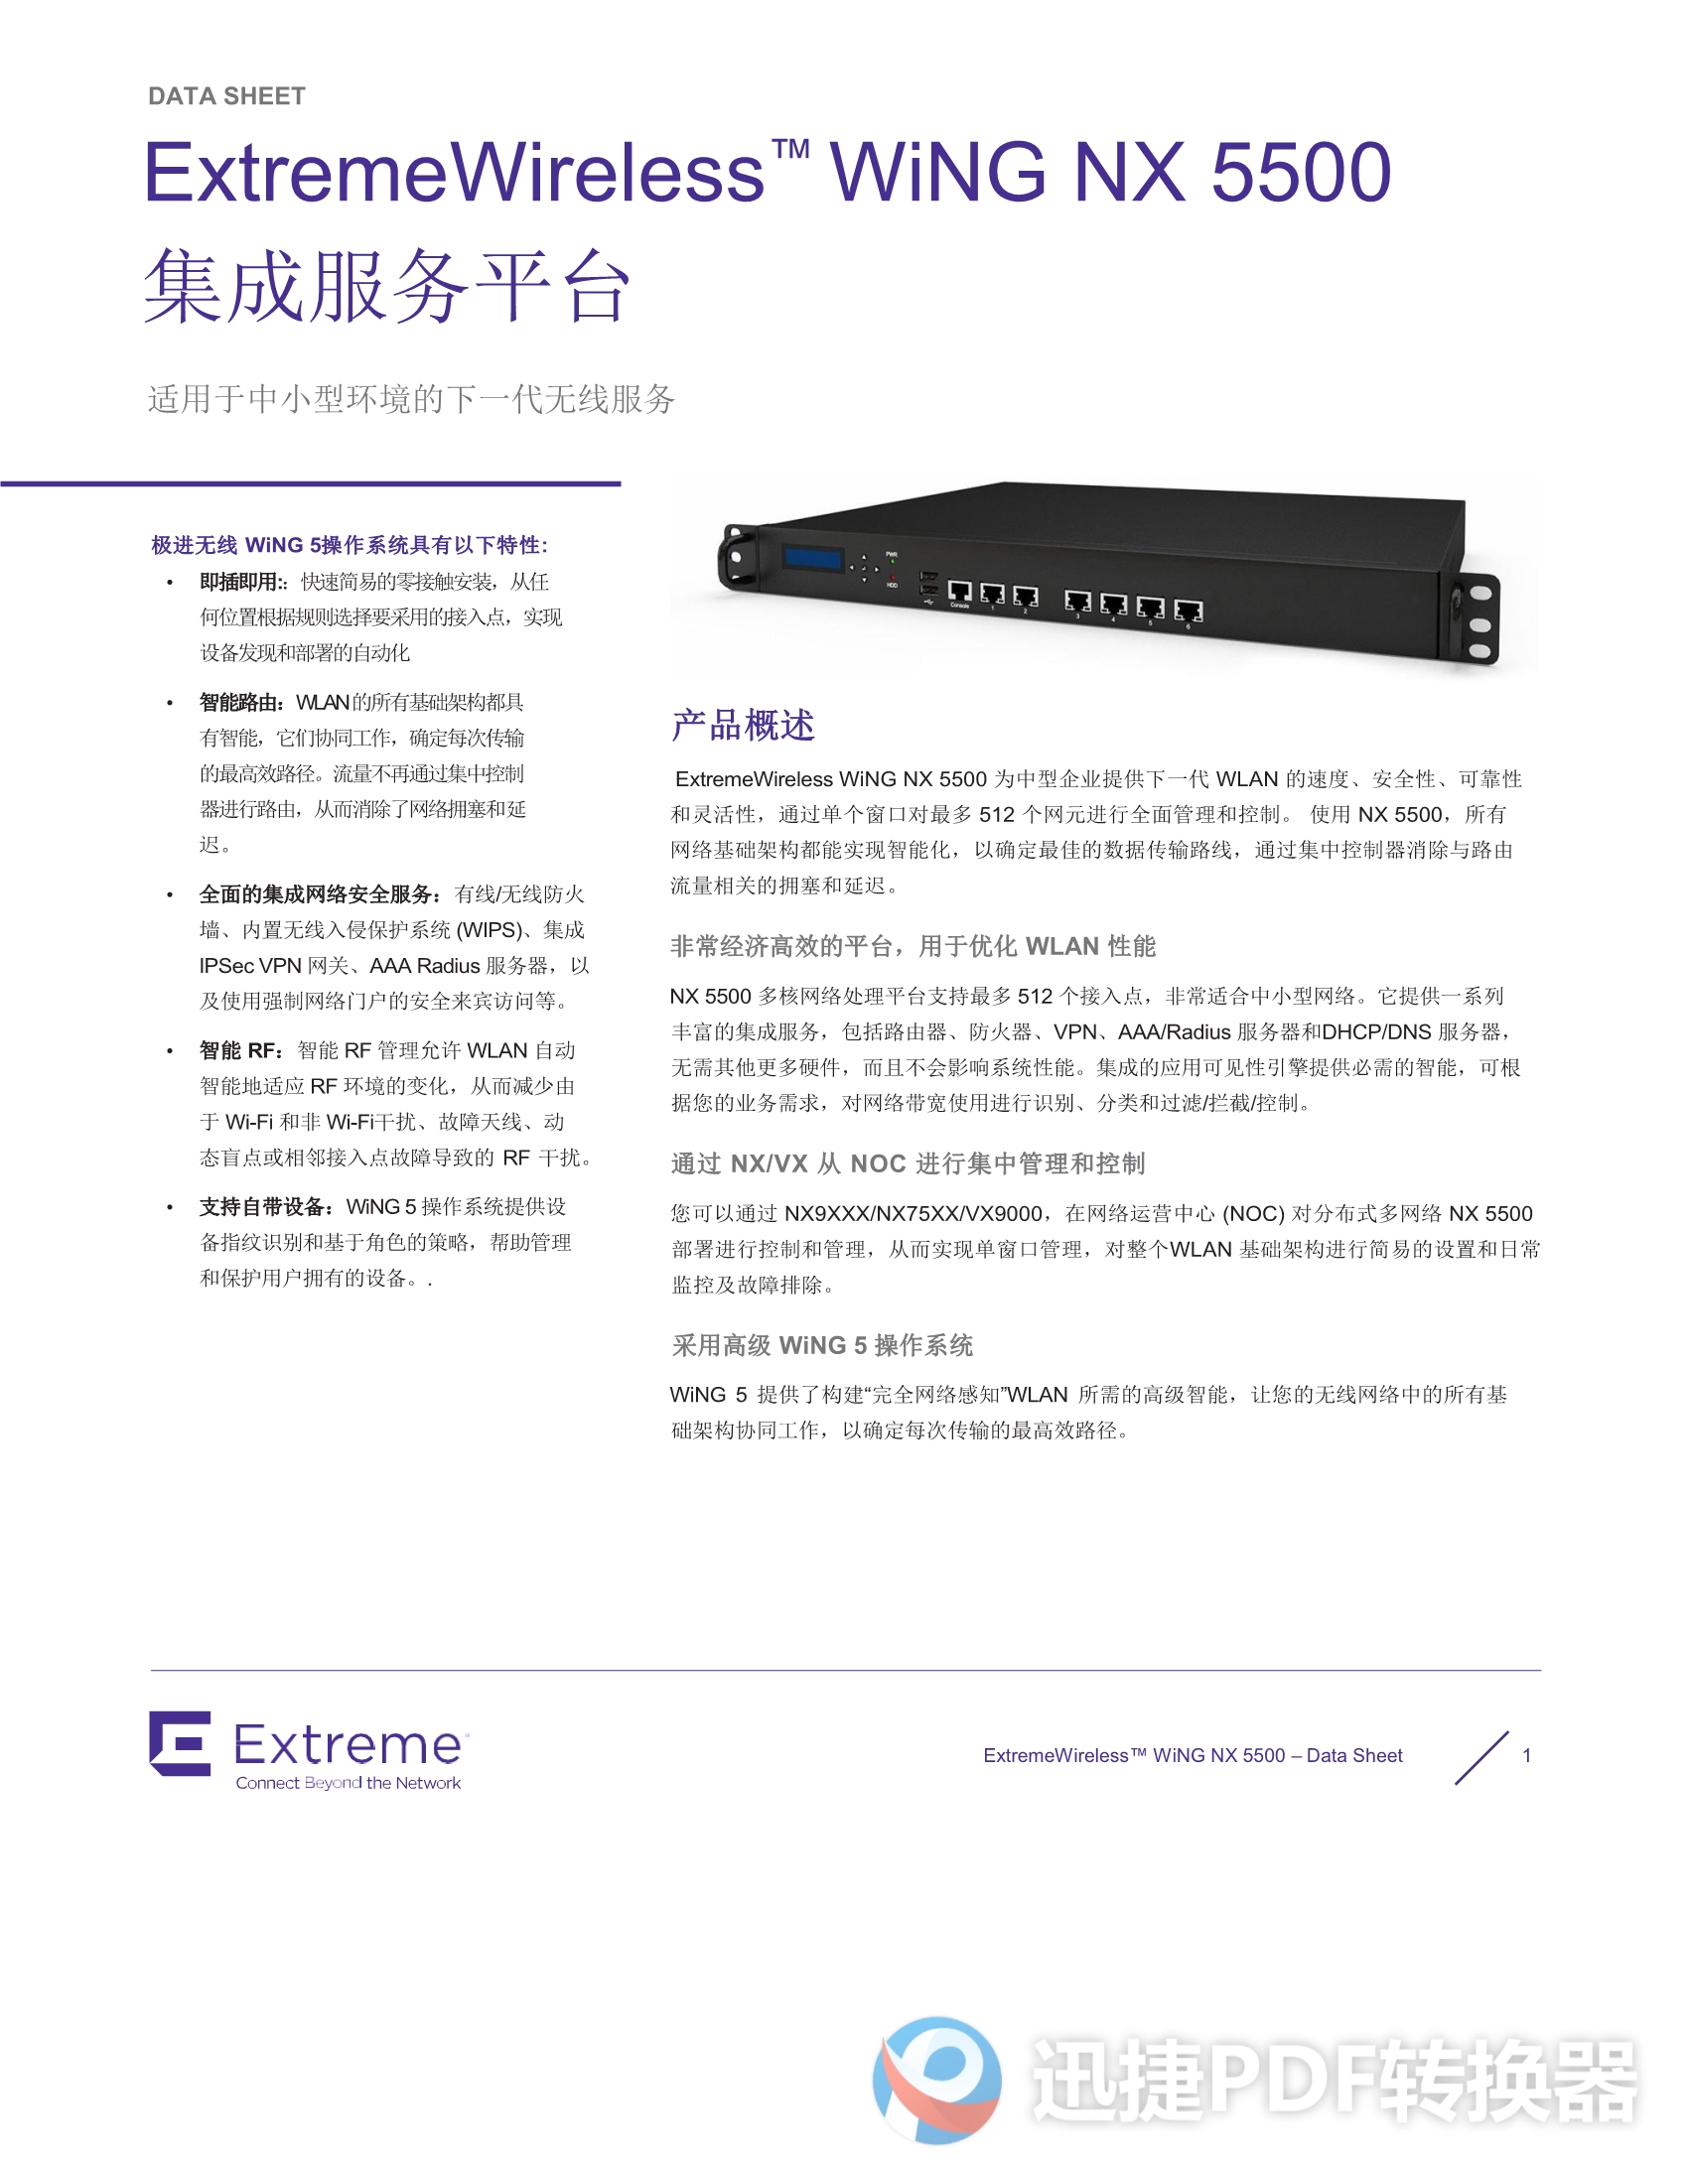 ExtremeWireless-WiNG-NX-5500-DS